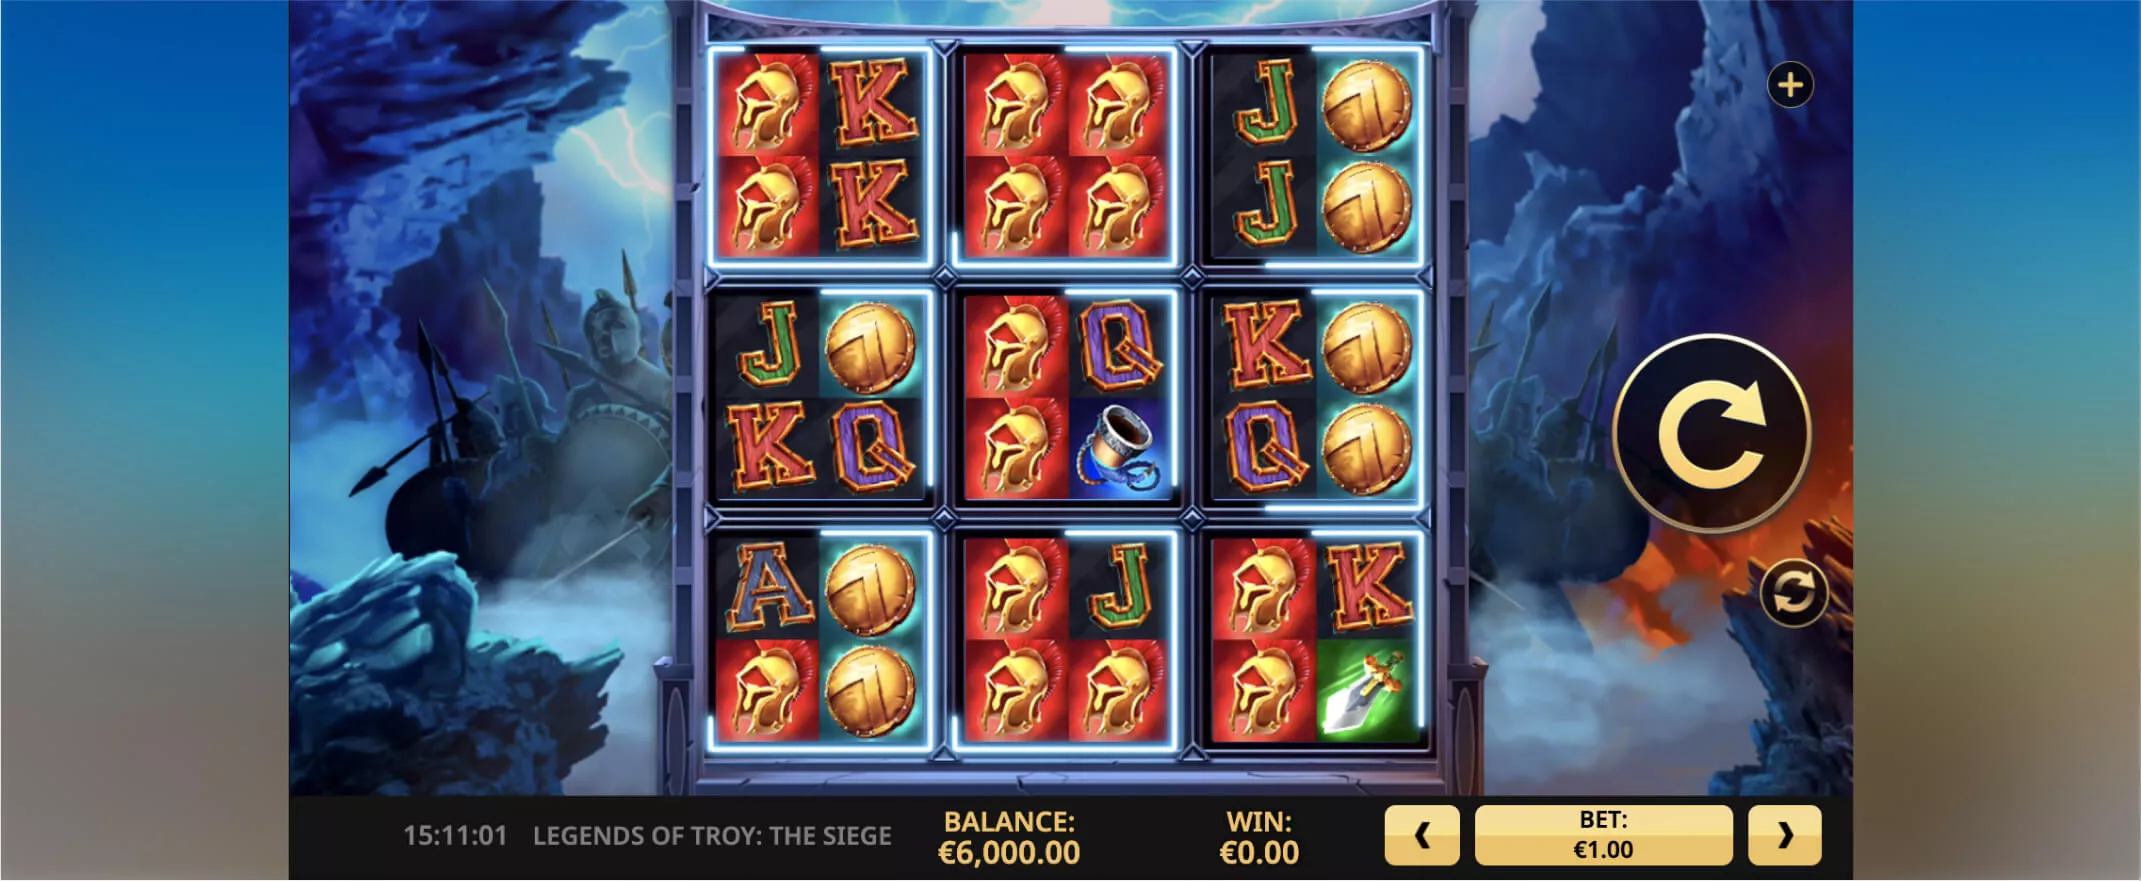 Legends of Troy: The Siege slot screenshot of the grid